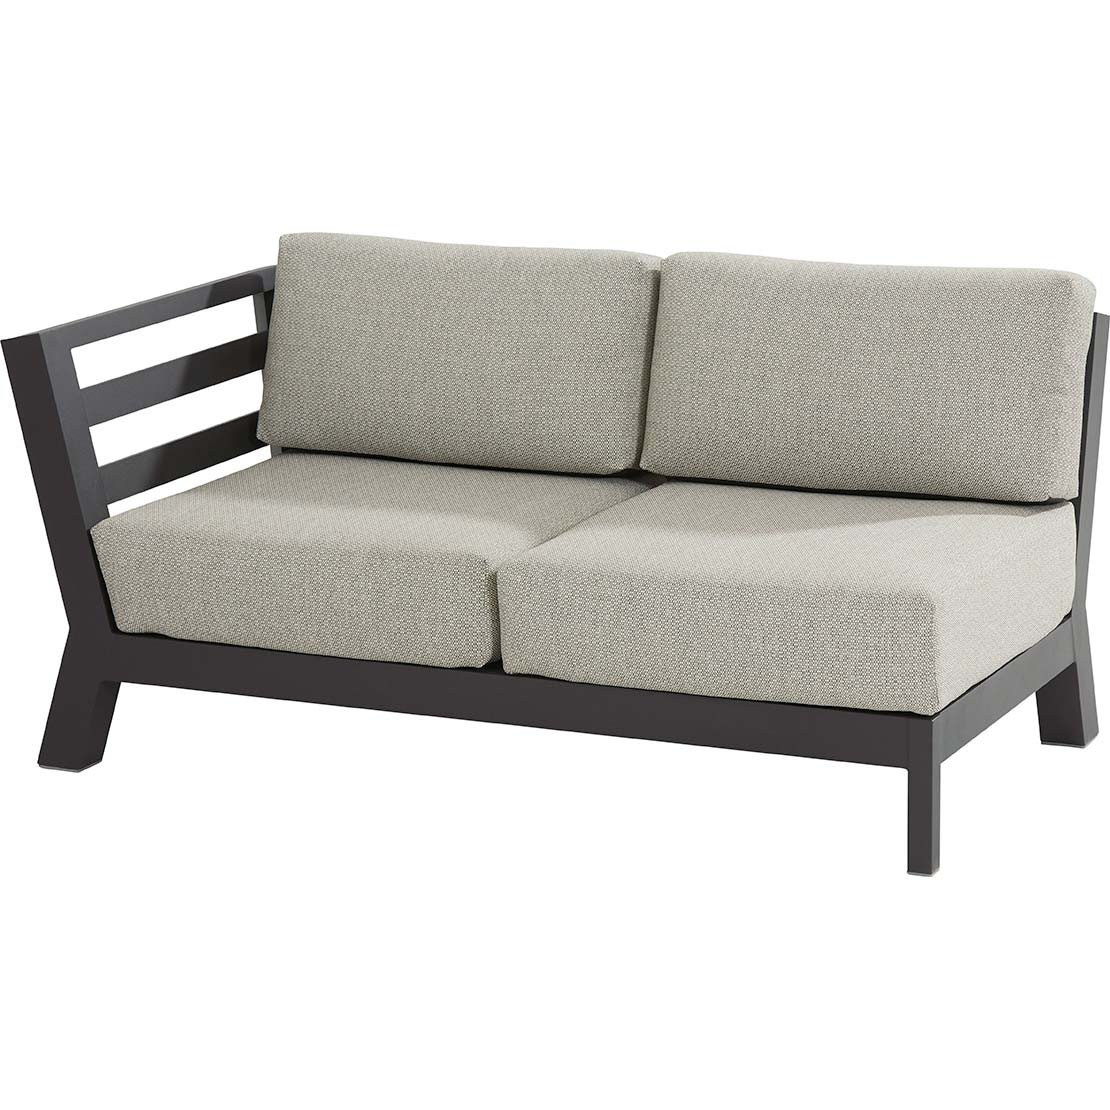 Meteoro modular 2 seater bench R arm with 4 cushions Anthracite